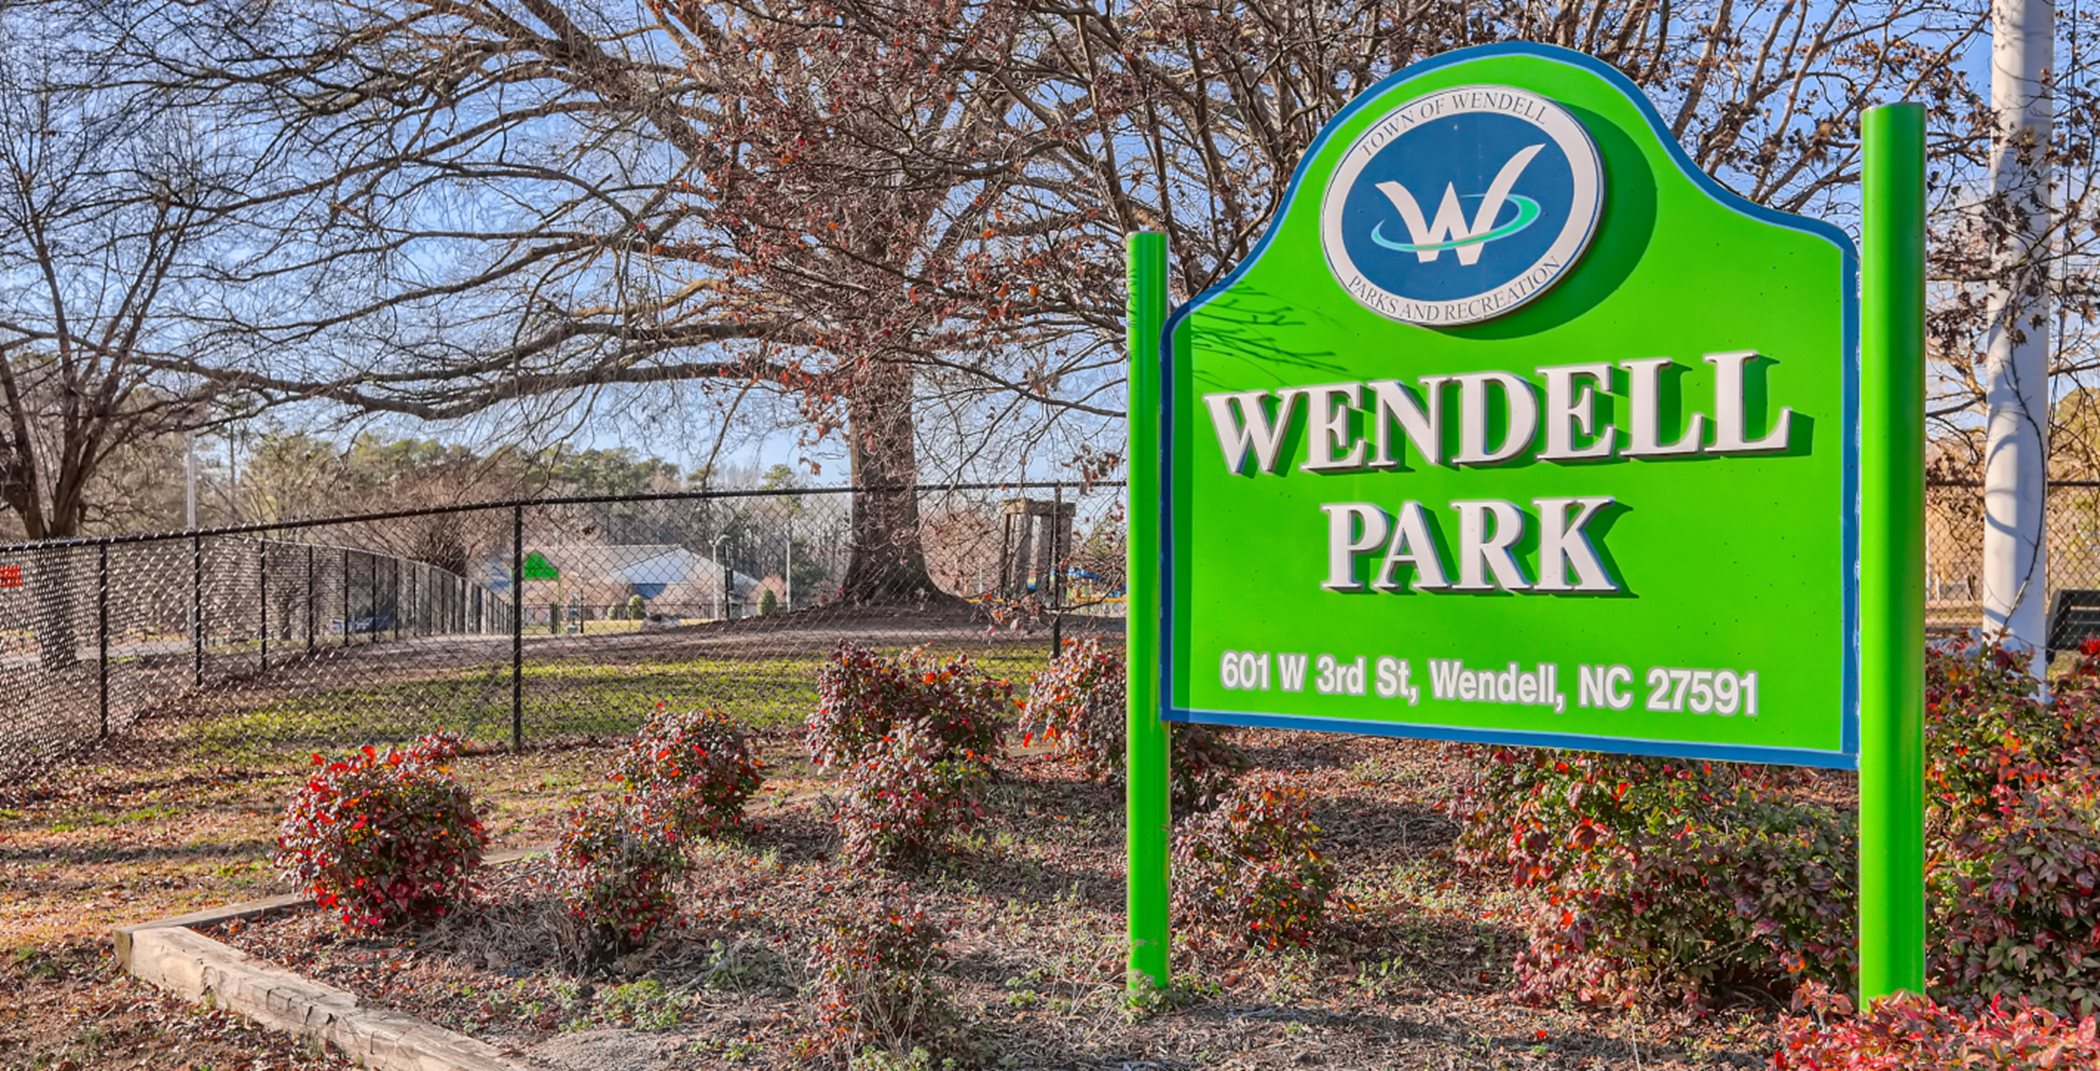 Two miles from Groves at Deerfield is Wendell Park